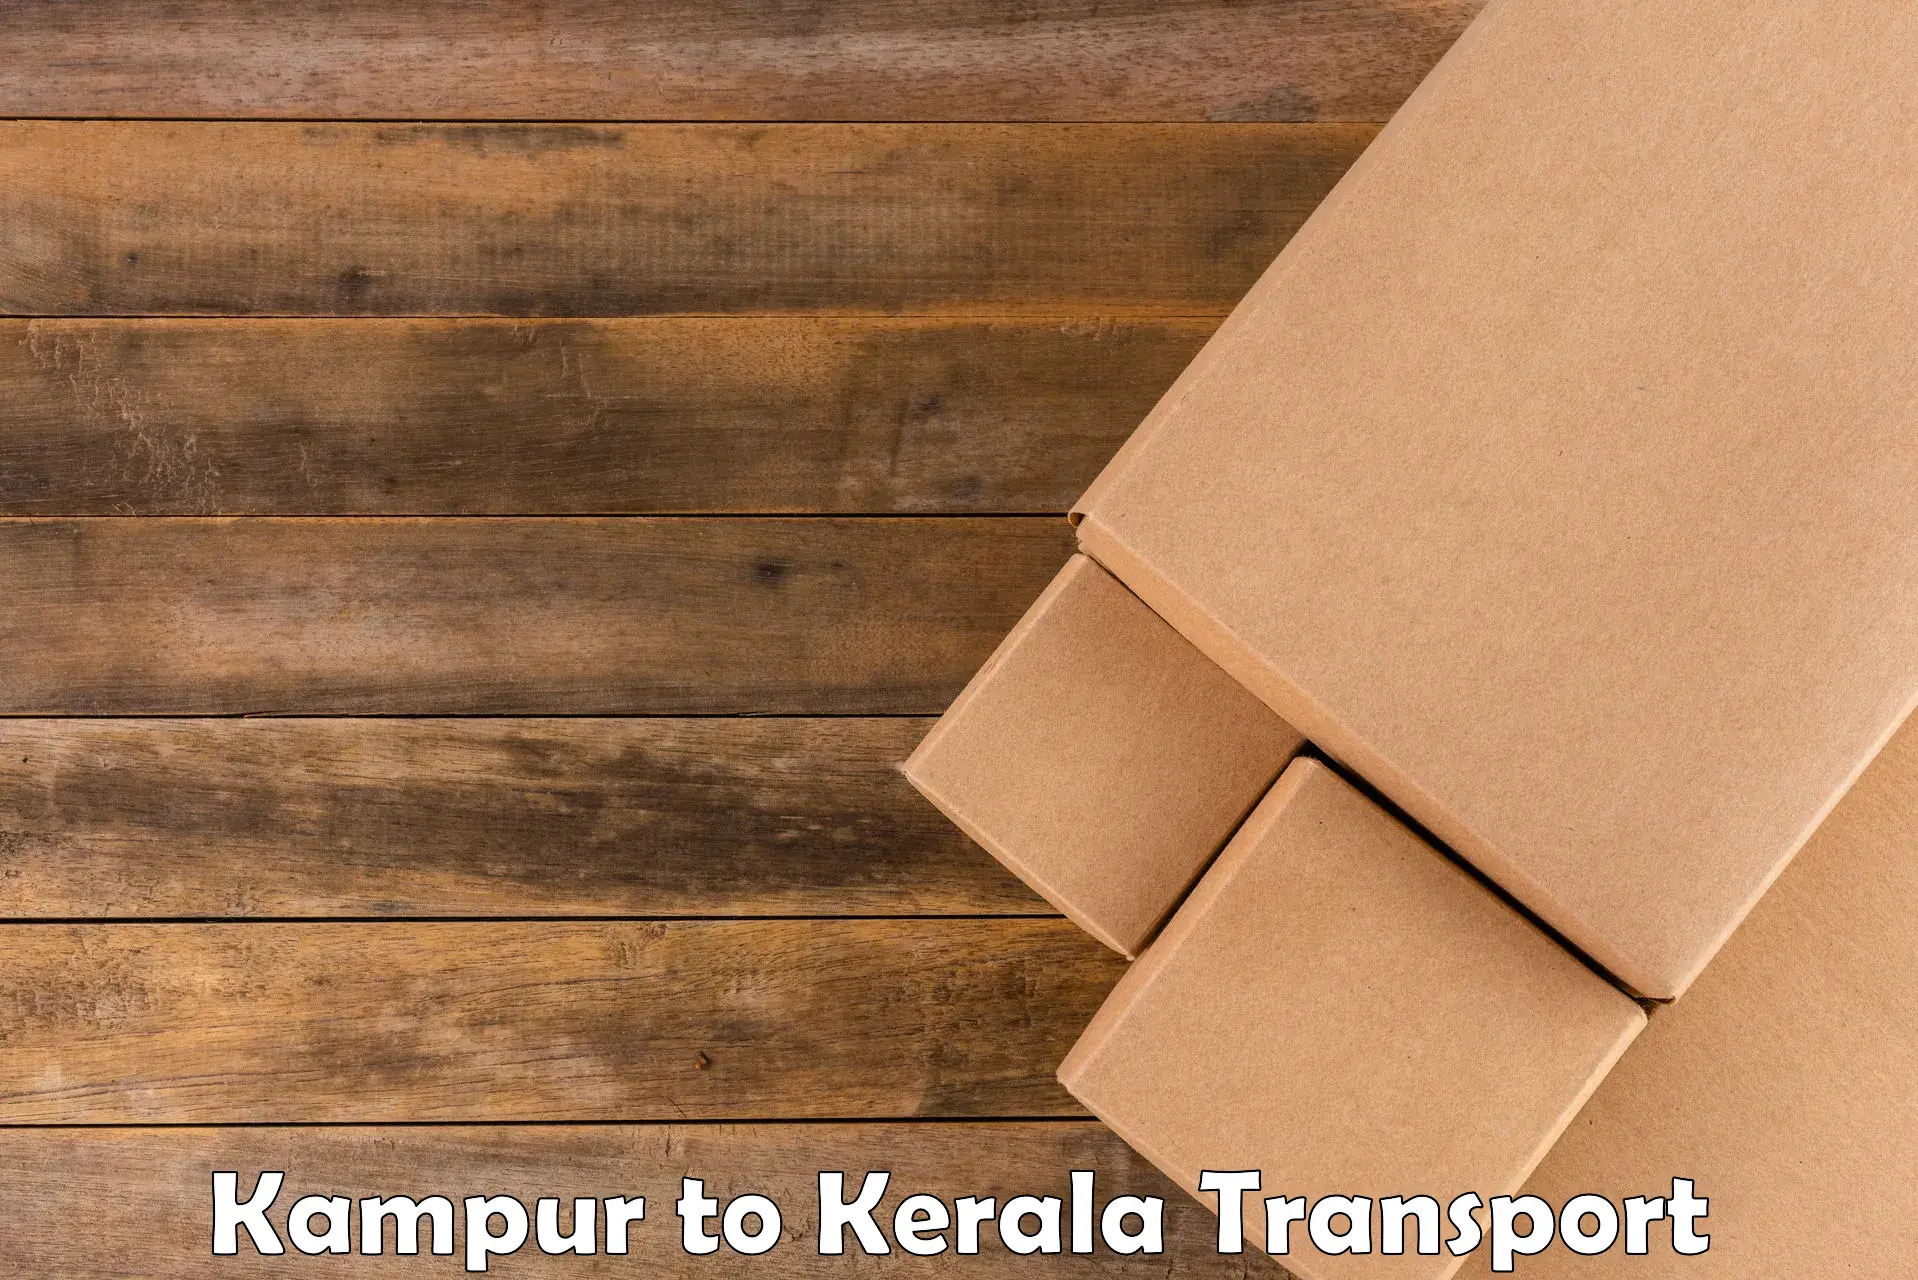 Commercial transport service Kampur to Malappuram